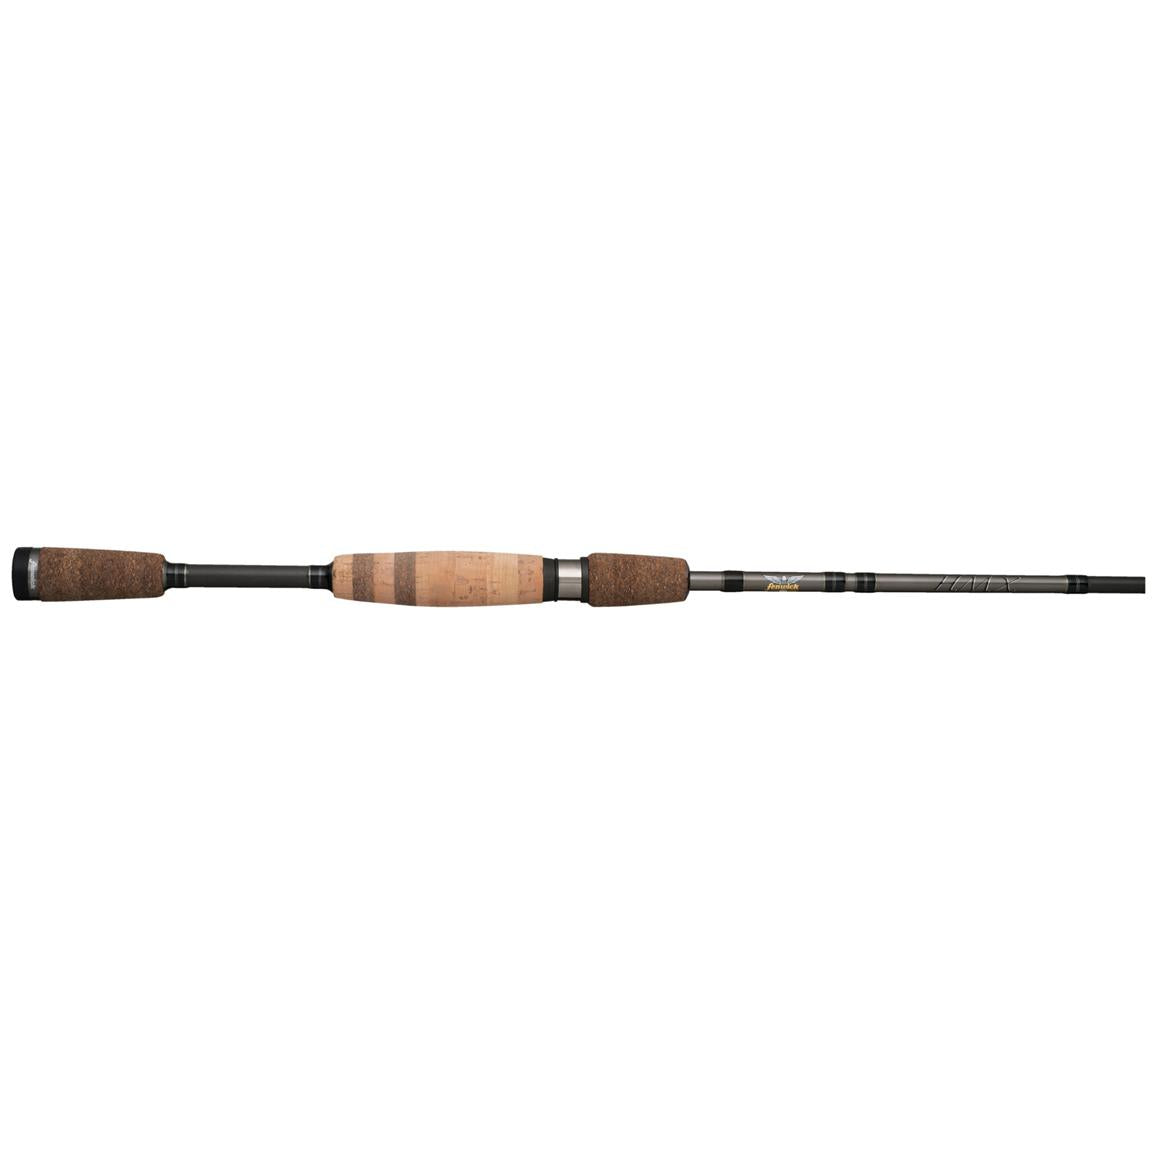 Fenwick HMX Spinning Rods – Canadian Tackle Store